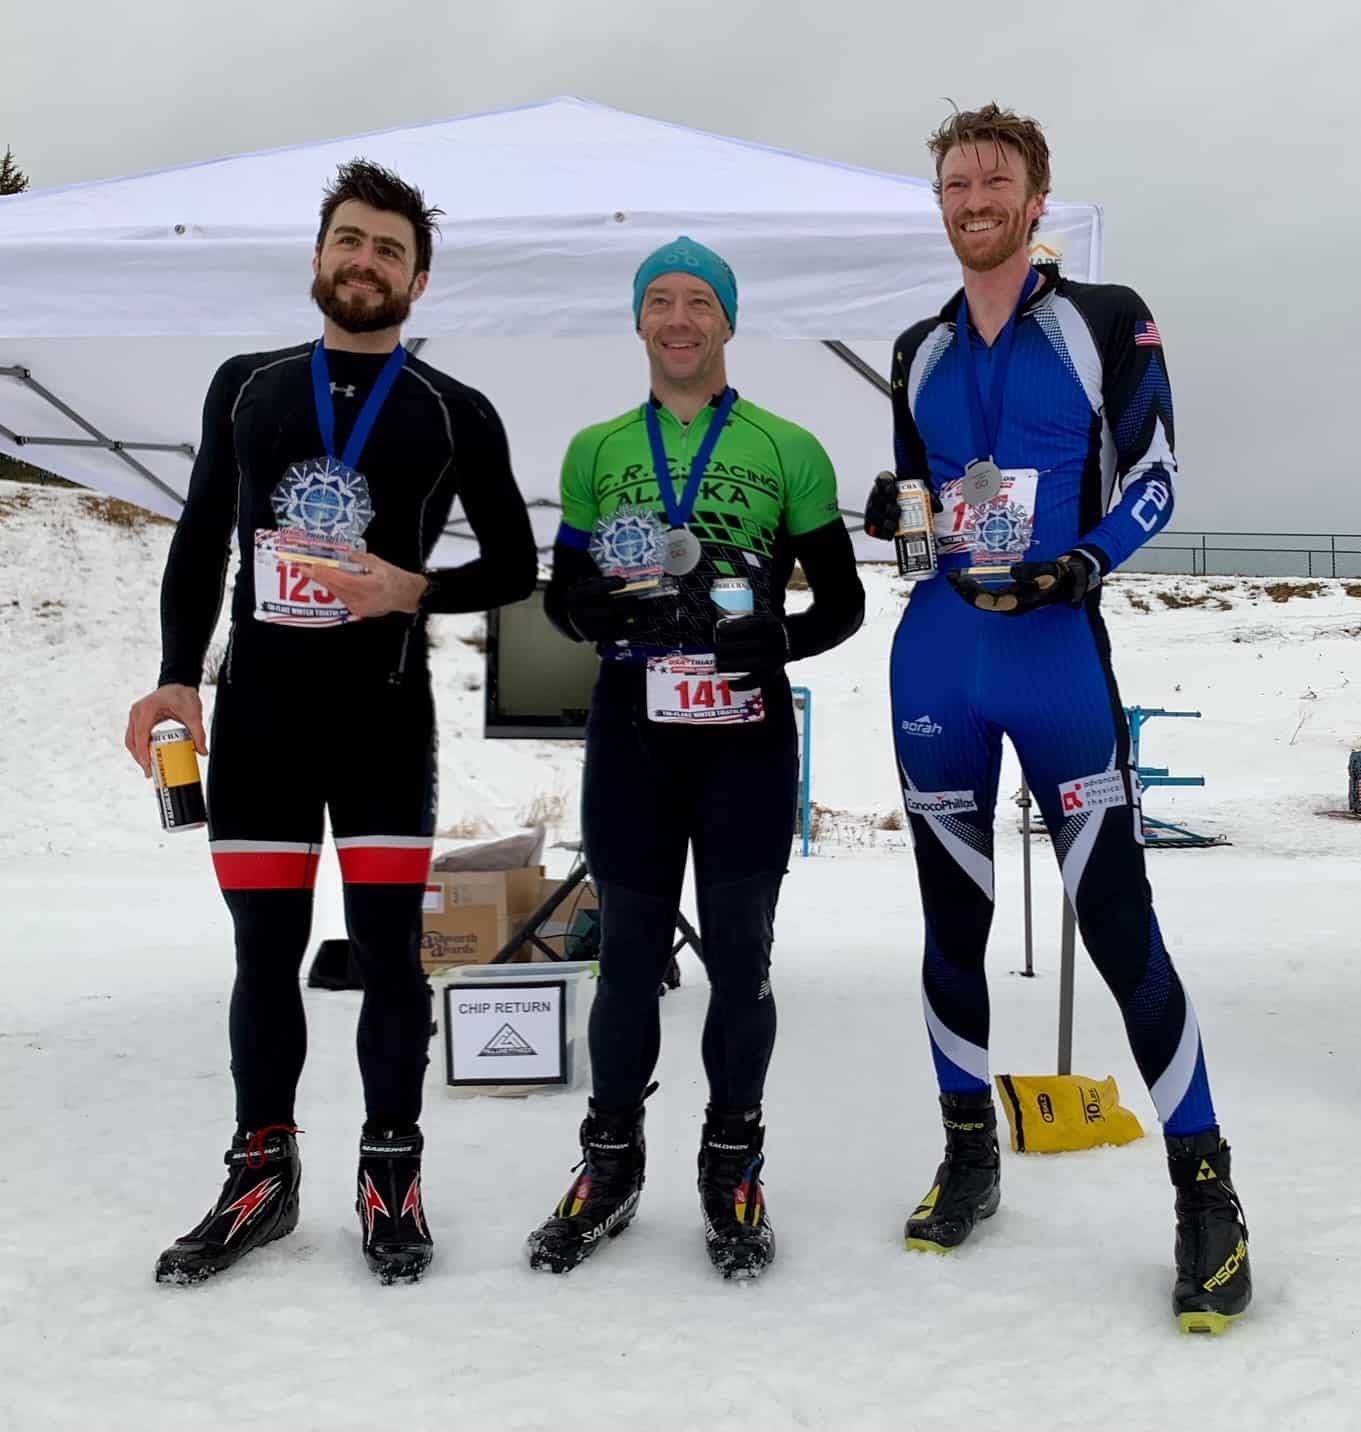 Eric Flanders claims winter triathlon in spring-like conditions - Alaska  Sports Report